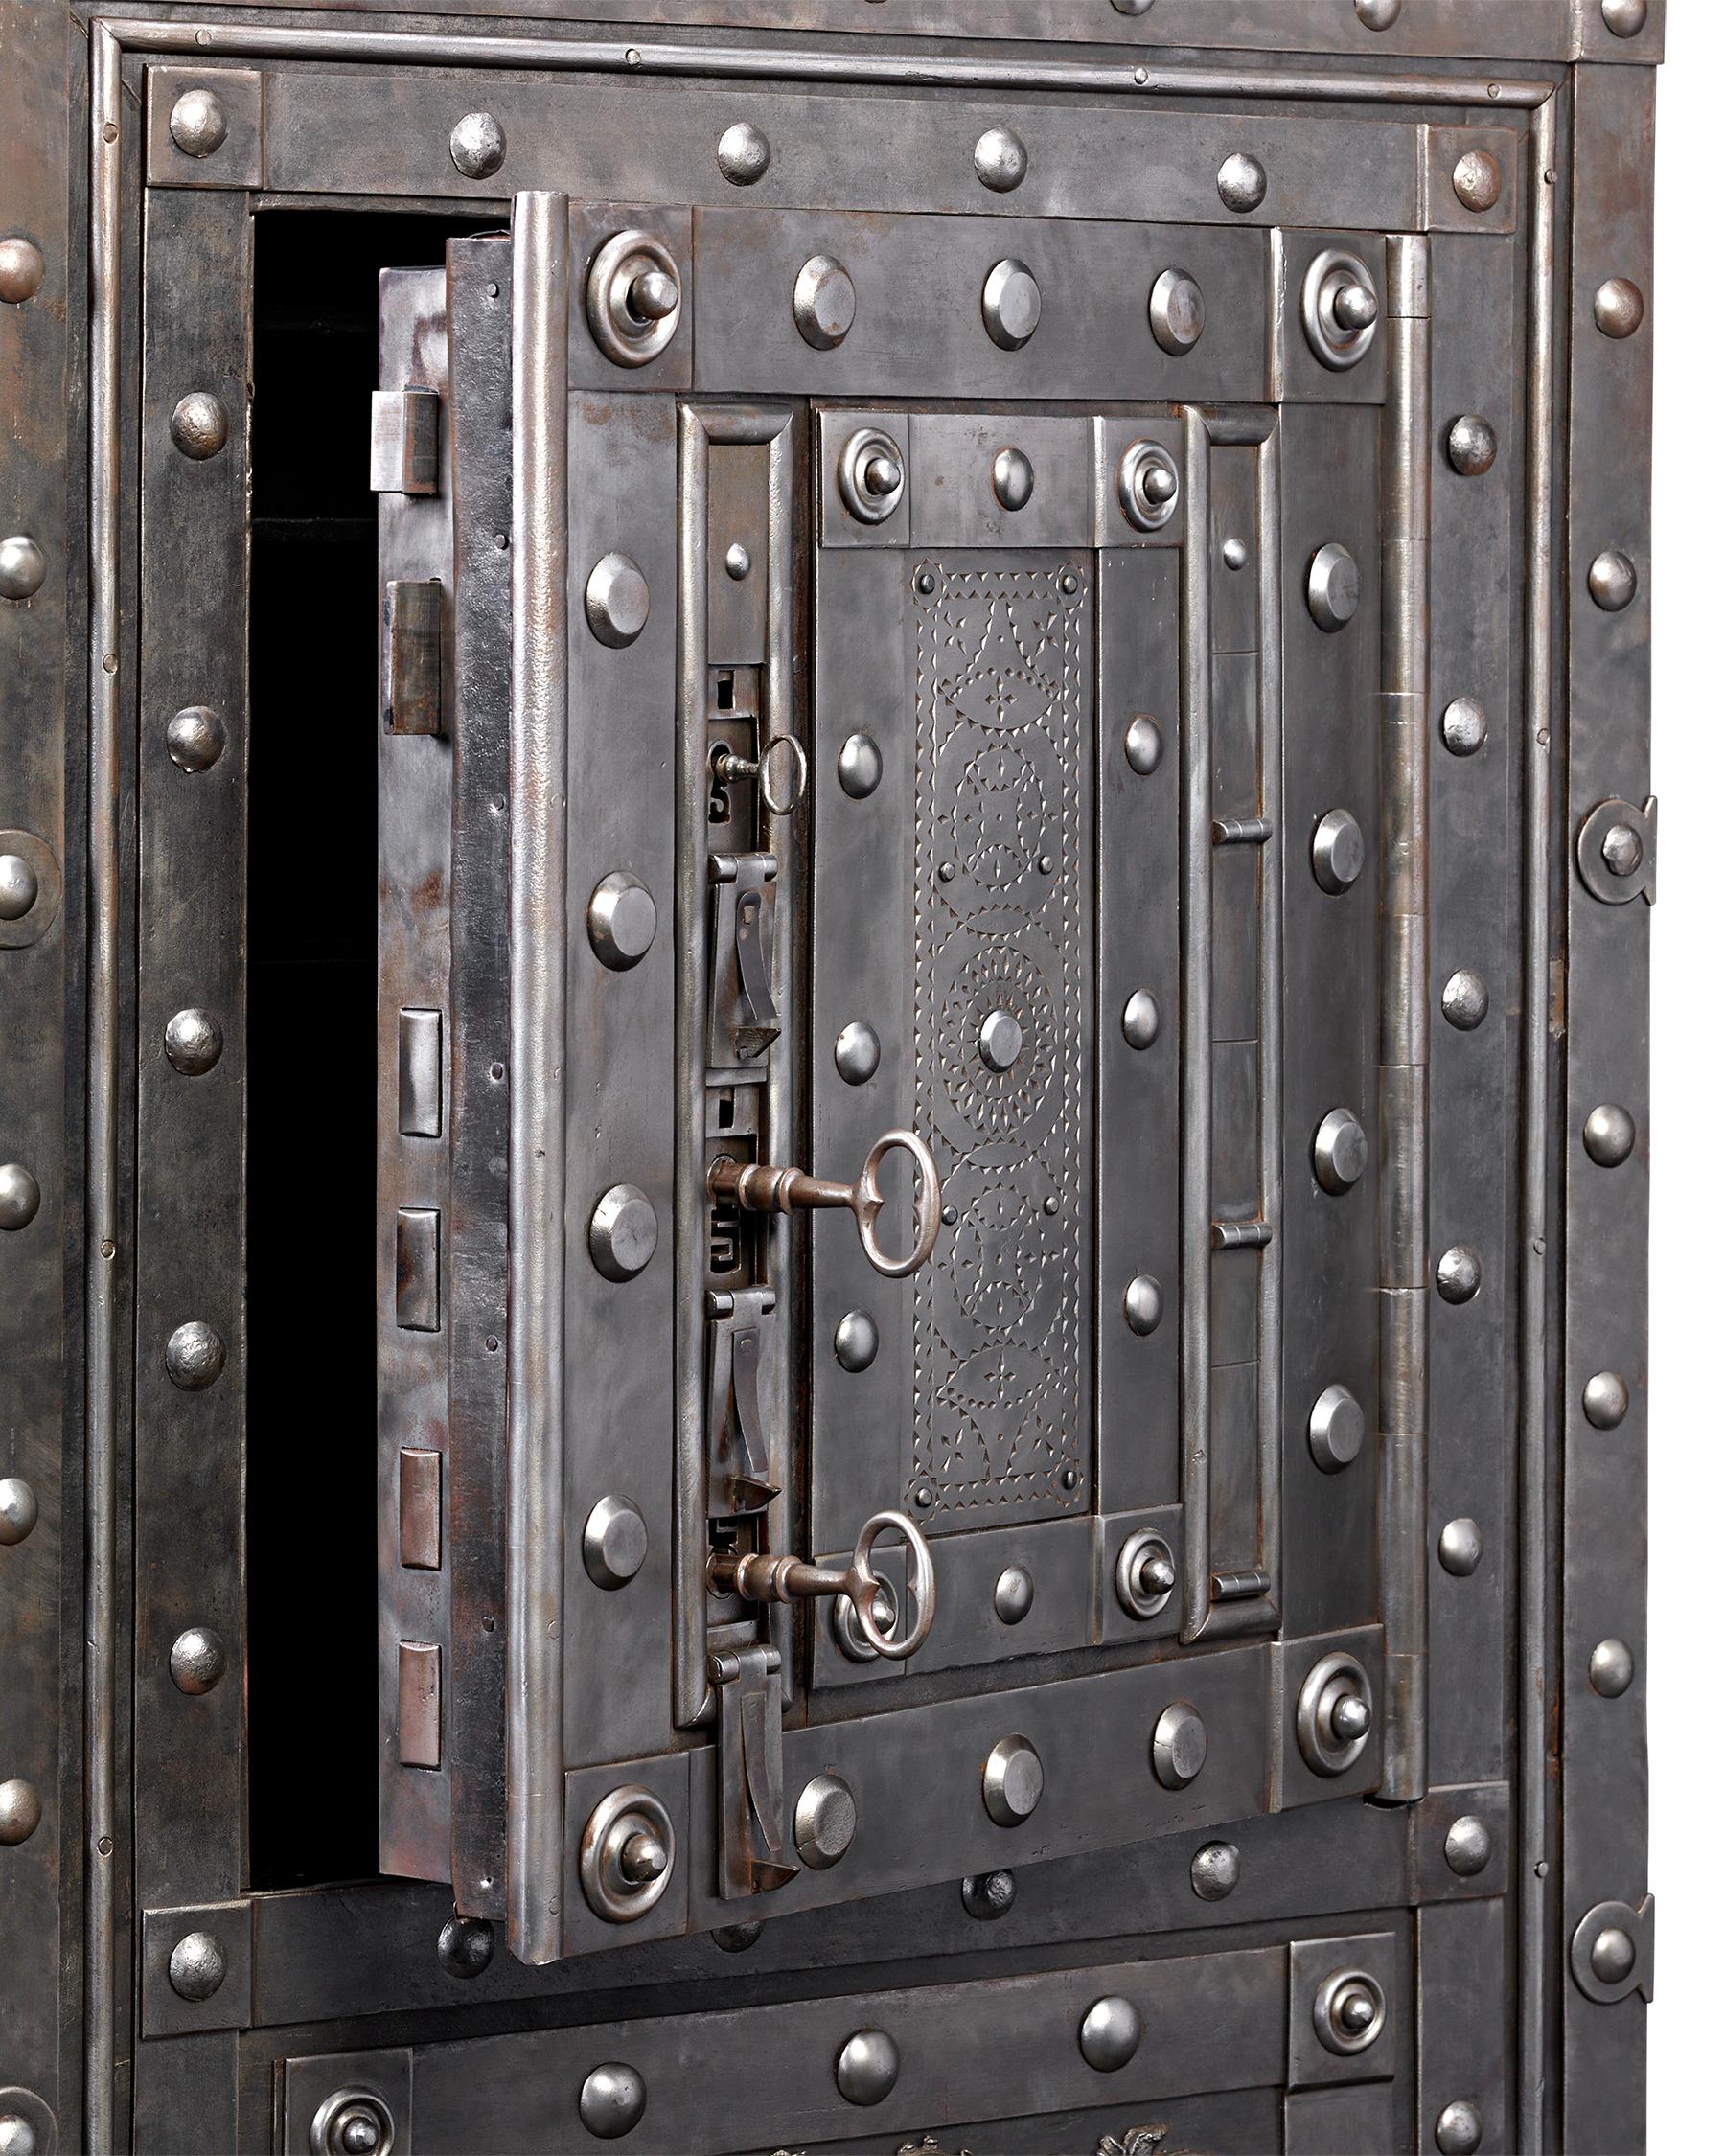 Distinguished by its intricate locking system and exceptional craftsmanship, this spacious 18th-century Italian safe provides the utmost in security. Weighing nearly 300 pounds, gaining access to the massive safe’s contents requires three keys and a